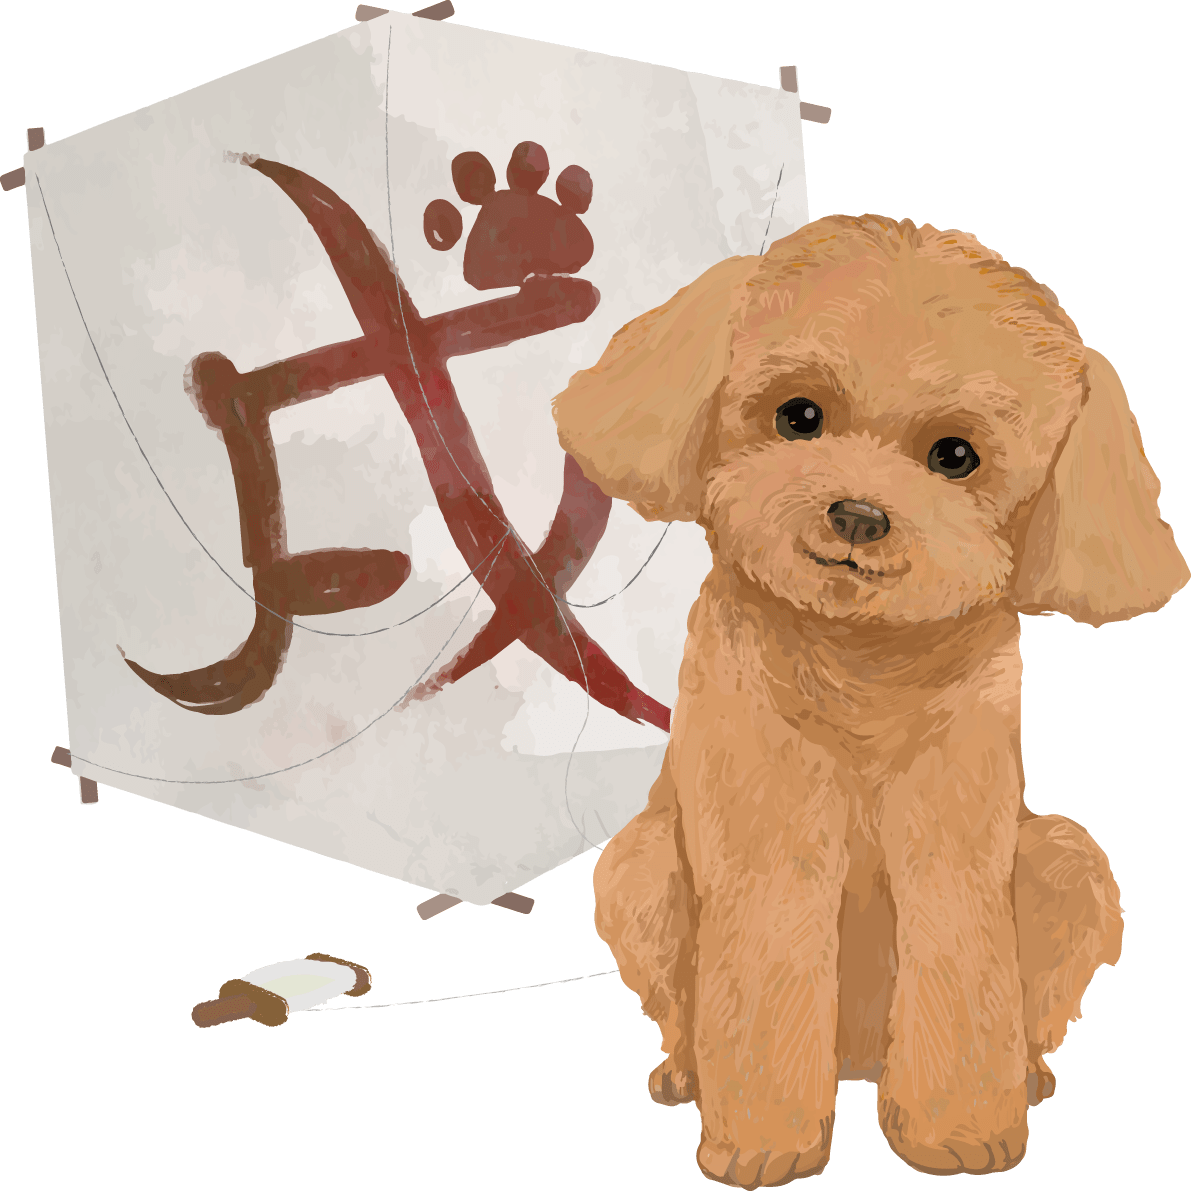 Toy Poodle and Kite-Year 2018 Zodiac